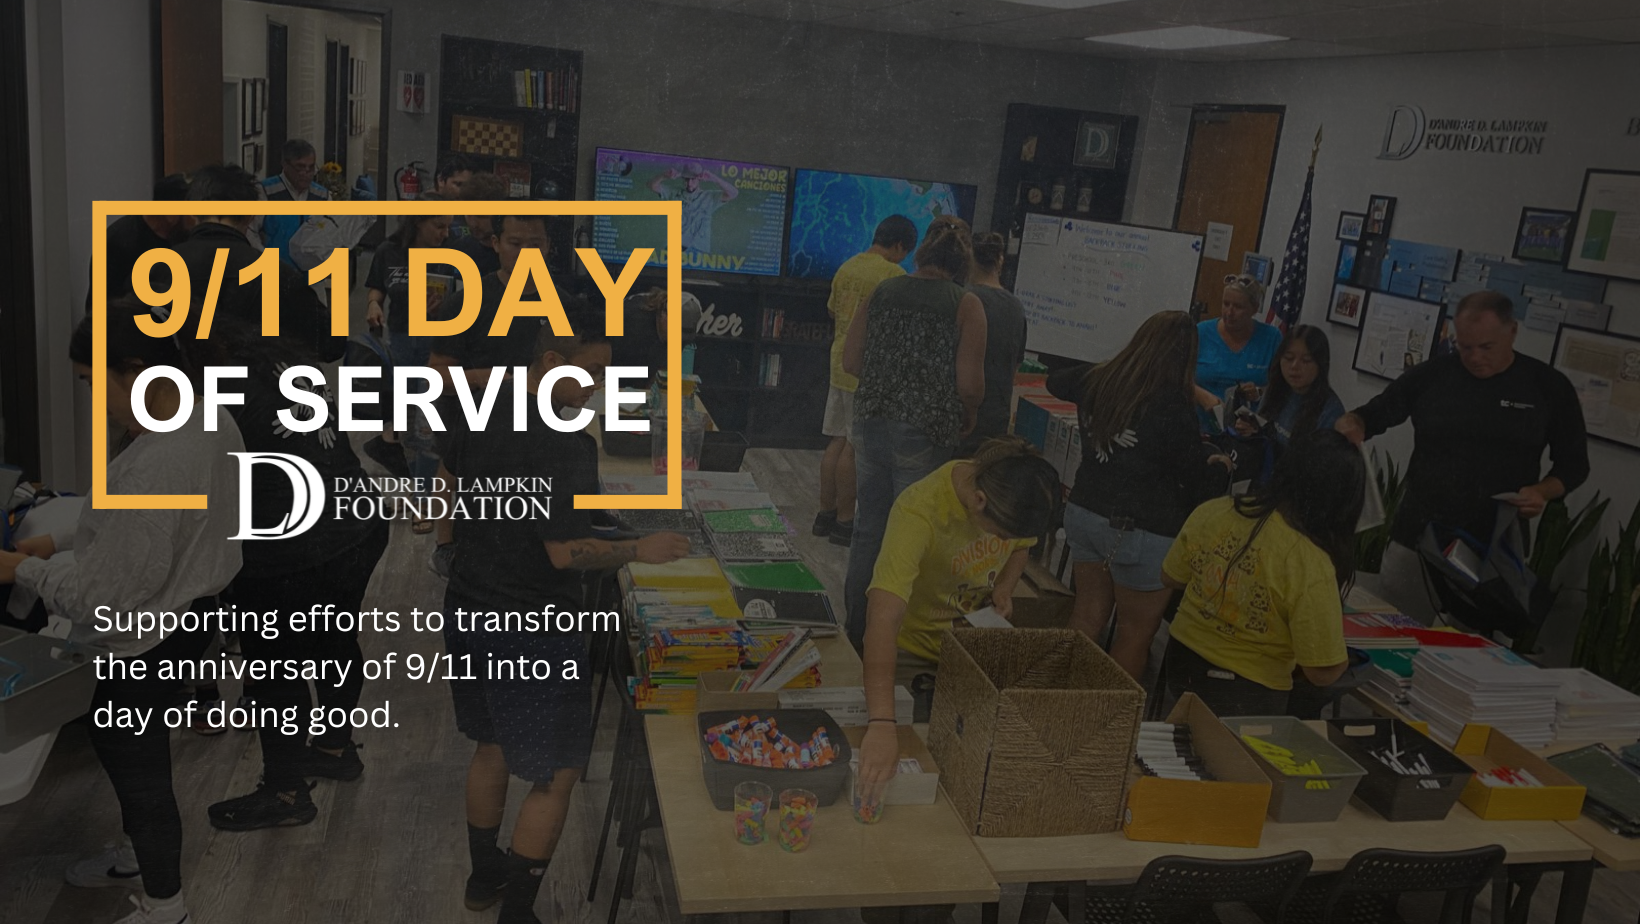 911 Day of Service and Remembrance